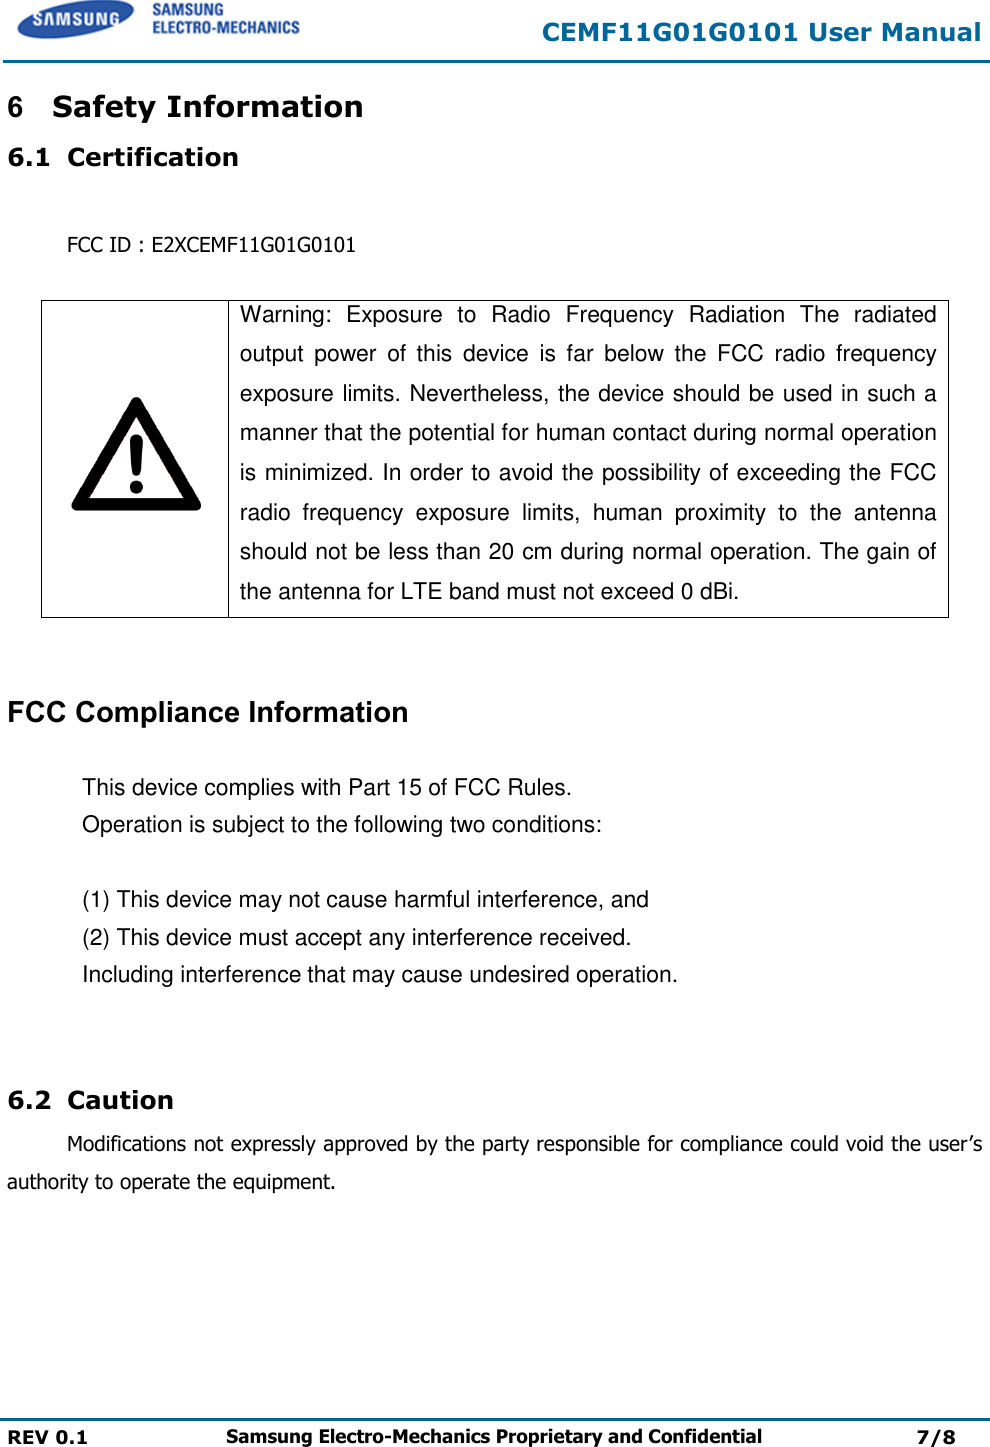  CEMF11G01G0101 User Manual  REV 0.1 Samsung Electro-Mechanics Proprietary and Confidential 7/8 6  Safety Information 6.1 Certification  FCC ID : E2XCEMF11G01G0101   Warning:  Exposure  to  Radio  Frequency  Radiation  The  radiated output  power  of  this  device  is  far  below  the  FCC  radio  frequency exposure limits. Nevertheless, the device should be used in such a manner that the potential for human contact during normal operation is minimized. In order to avoid the possibility of exceeding the FCC radio  frequency  exposure  limits,  human  proximity  to  the  antenna should not be less than 20 cm during normal operation. The gain of the antenna for LTE band must not exceed 0 dBi.   FCC Compliance Information   This device complies with Part 15 of FCC Rules.  Operation is subject to the following two conditions:   (1) This device may not cause harmful interference, and  (2) This device must accept any interference received.    Including interference that may cause undesired operation.   6.2 Caution Modifications not expressly approved by the party responsible for compliance could void the user’s authority to operate the equipment.  M &amp; SOFT AMERICA MAP CENTERTEL : 888-757-0010WEBSITE : www.mapnsoft.comMAP DATABASE HOTLINEThis equipment has been tested and found to comply with the limits for a Class A digital device, pursuant to part 15 of the FCC Rules. These limits are designed to provide reasonable protection against harmful interference in a residential installation. This equipment generates, uses and can radiate radio frequency energy and, if not installed and used in accordance with the instructions, may cause harmful interference to radio communications. However, there is no guarantee that interference will not occur in a particular installation. If this equipment does cause harmful interference to radio or television reception, which can be determined by turning the equipment off and on, the user is encouraged to try to correct the interference by one or more of the following measures: ˍ Reorient or relocate the receiving antenna. ˍ Increase the separation between the equipment and receiver. ˍ Connect the equipment into an outlet on a circuit different from that to which the receiver is connected. ˍ Consult the dealer or an experienced radio/TV technician for help. Caution: Any changes or modiﬁcations to this device not explicitly approved by manufacturer could void your authority to operate this equipment. This device complies with part 15 of the FCC Rules. Operation is subject to the following two conditions: (1) This device may notcause harmful interference, and (2) this device must accept any interference received, including interference that may cause undesired operation. ,&amp;:DUQLQJ7KLVGHYLFHFRPSOLHVZLWK,QGXVWU\&amp;DQDGDOLFHQFHH[HPSW566VWDQGDUGV2SHUDWLRQLVVXEMHFWWRWKHIROORZLQJWZRFRQGLWLRQVWKLVGHYLFHPD\QRWFDXVHLQWHUIHUHQFHDQGWKLVGHYLFHPXVWDFFHSWDQ\LQWHUIHUHQFHLQFOXGLQJLQWHUIHUHQFHWKDWPD\FDXVHXQGHVLUHGRSHUDWLRQRIWKHGHYLFH/HSUpVHQWDSSDUHLOHVWFRQIRUPHDX[&amp;15G,QGXVWULH&amp;DQDGDDSSOLFDEOHVDX[DSSDUHLOVUDGLRH[HPSWVGHOLFHQFH/H[SORLWDWLRQHVWDXWRULVpHDX[GHX[FRQGLWLRQVVXLYDQWHVODSSDUHLOQHGRLWSDVSURGXLUHGHEURXLOODJHHWOXWLOLVDWHXUGHODSSDUHLOGRLWDFFHSWHUWRXWEURXLOODJHUDGLRpOHFWULTXHVXELPrPHVLOHEURXLOODJHHVWVXVFHSWLEOHGHQFRPSURPHWWUHOHIRQFWLRQQHPHQW This equipment complies with FCC radiation exposure limits set forth for an uncontrolled environment. This equipment should be installed and operated with minimum 20 cm between the radiator and your body. This transmitter must not be collocated or operating in conjunction with any other antenna or transmitter unless authorized to do so by the FCC. 